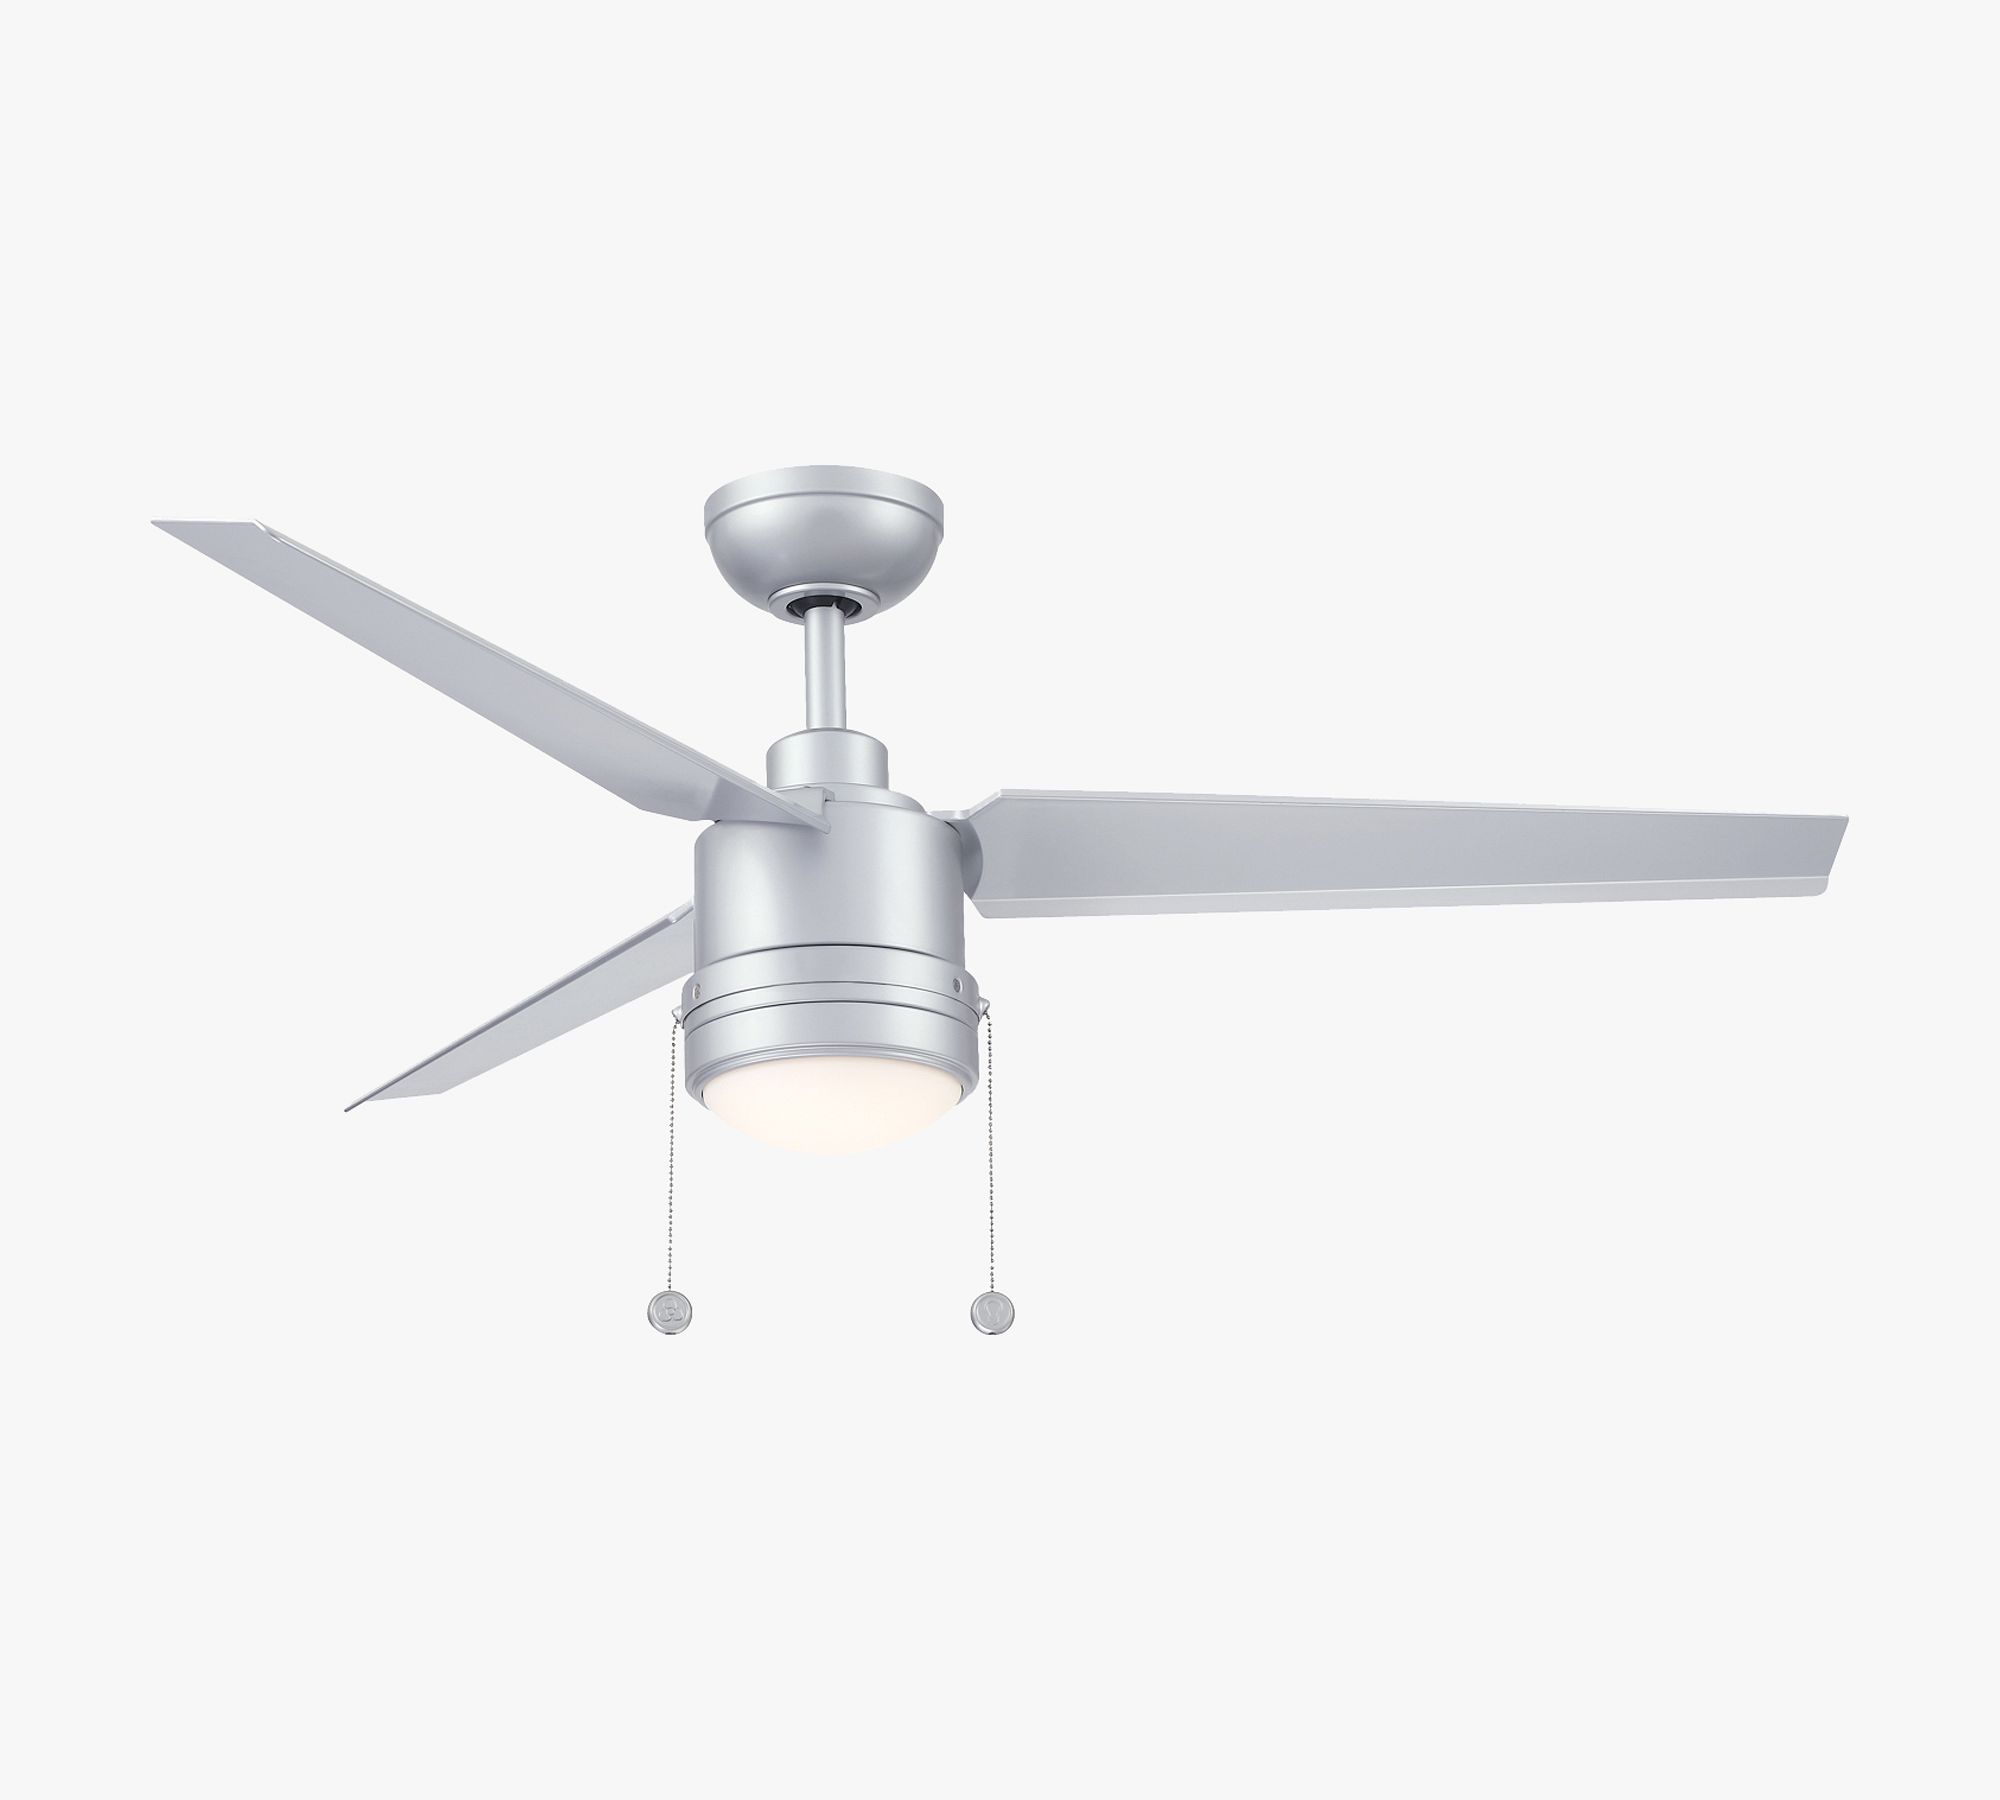 PC/DC Ceiling Fan with LED Light Kit